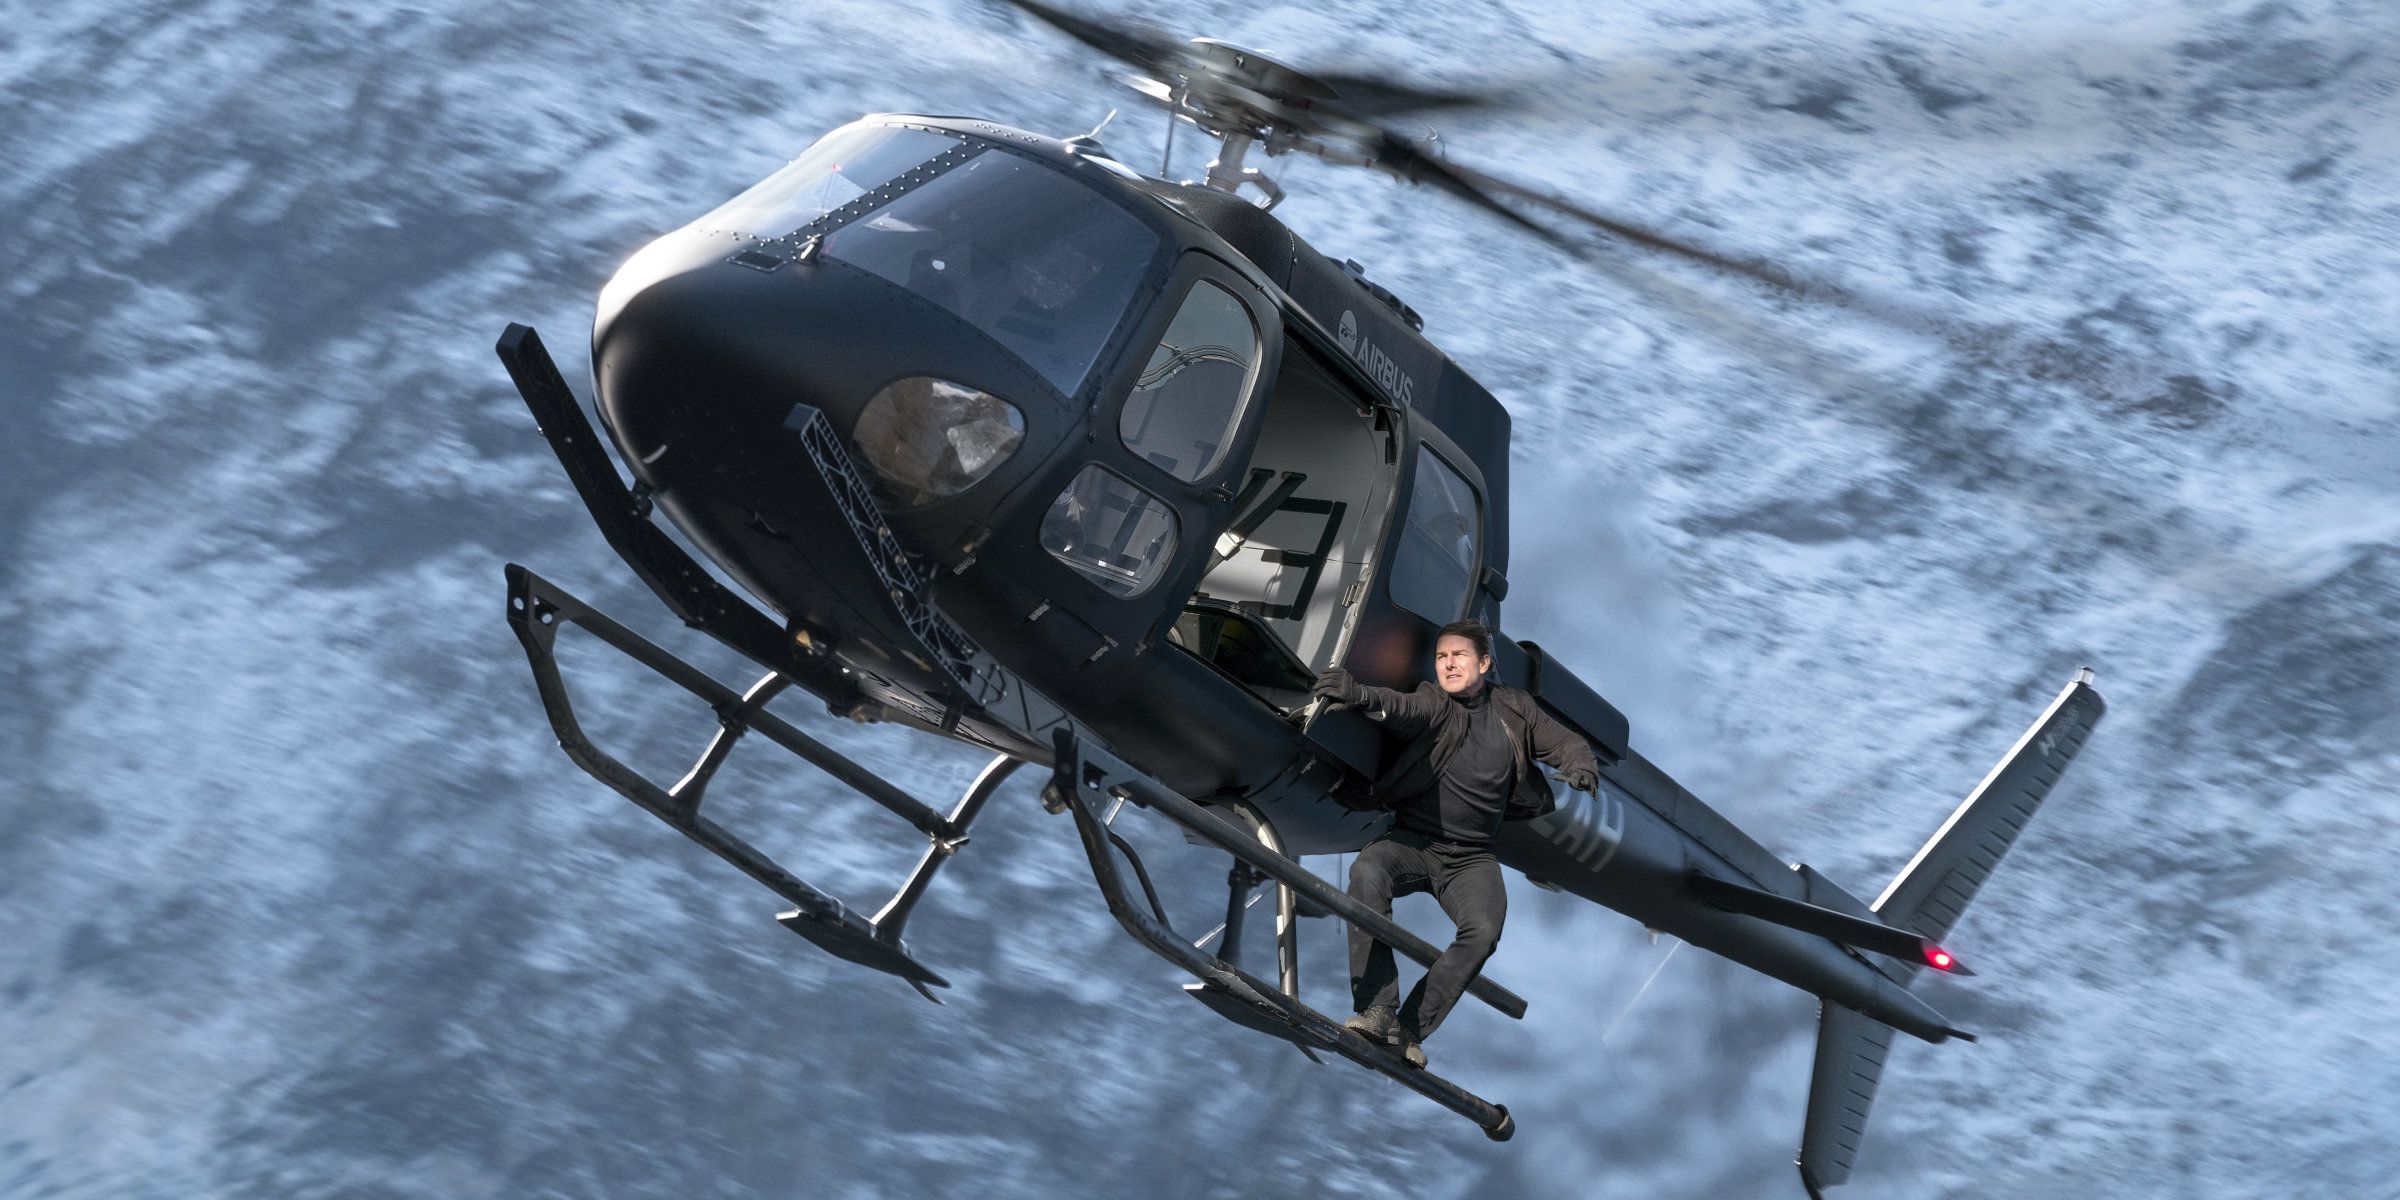 A helicopter in Mission Impossible Fallout